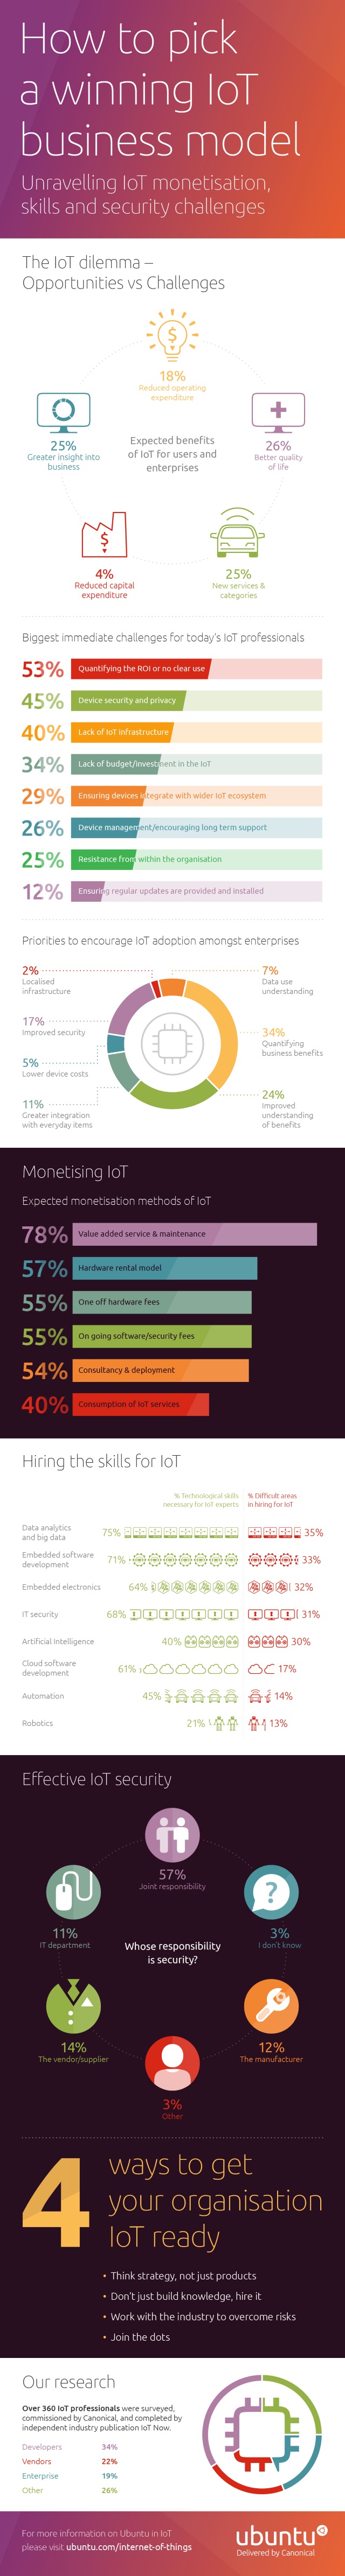 canonical-iot-infographic-small